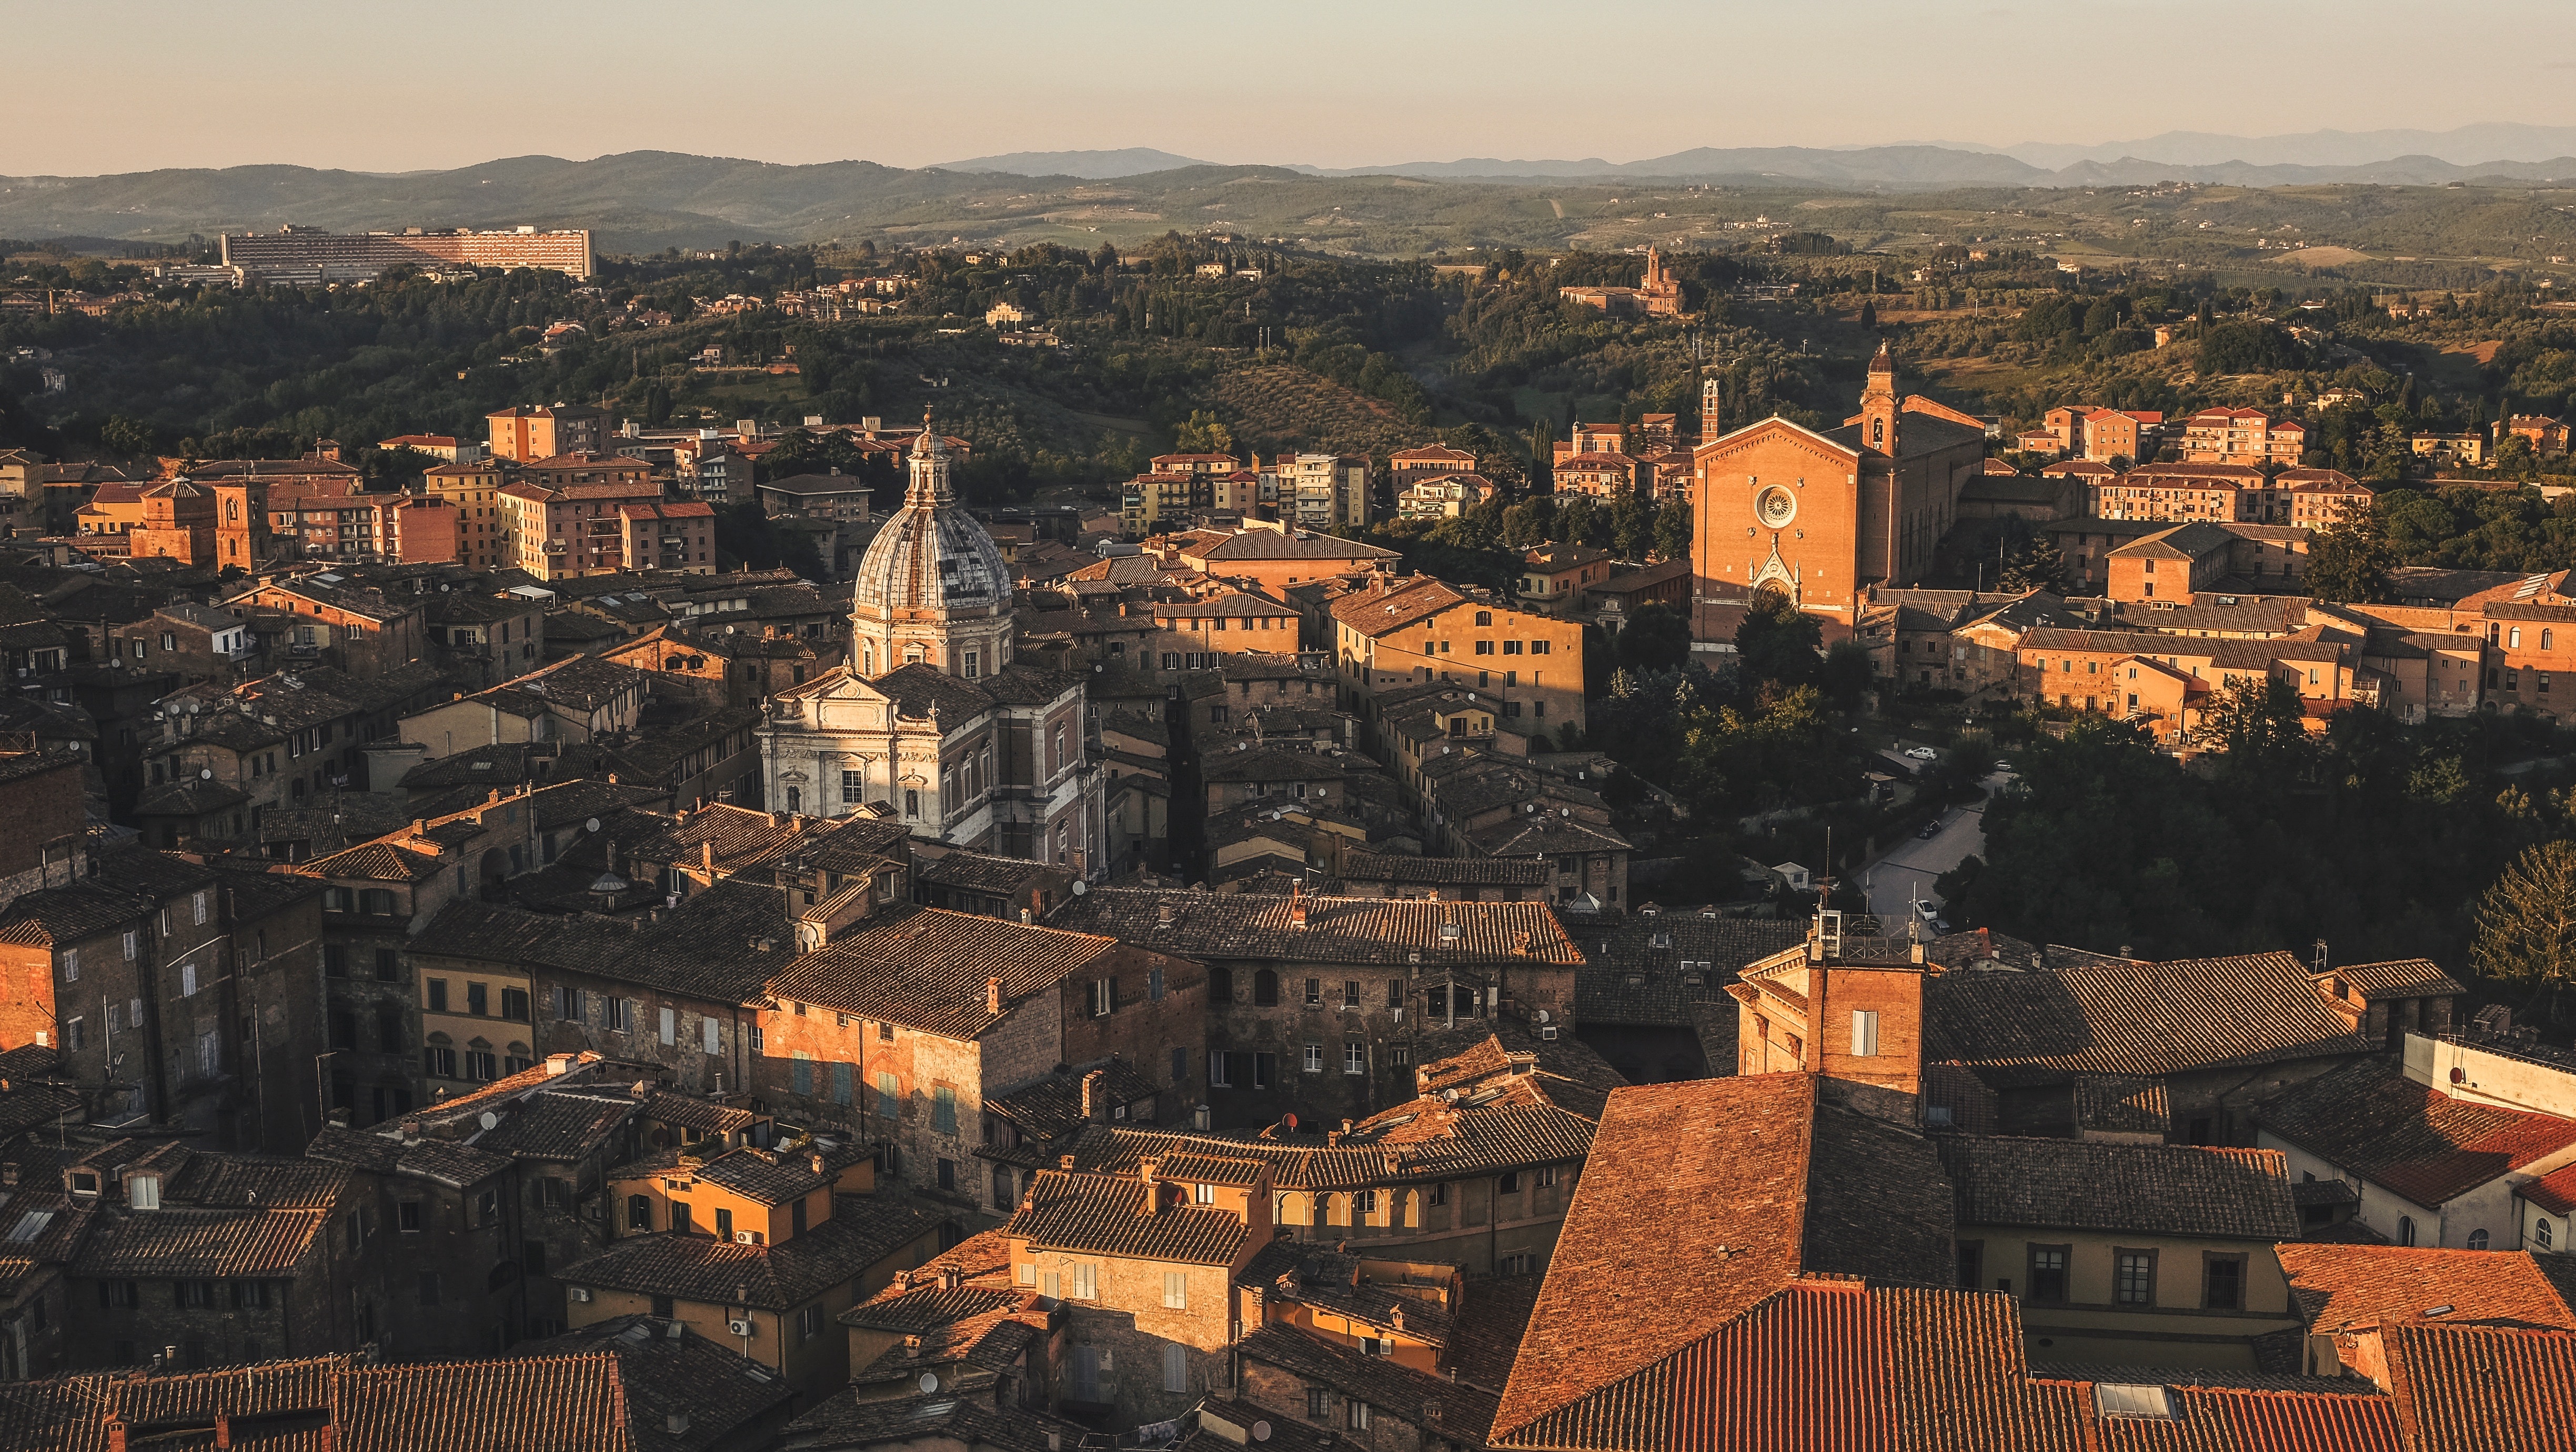 Siena, Tuscany is one of the best places to visit in Italy